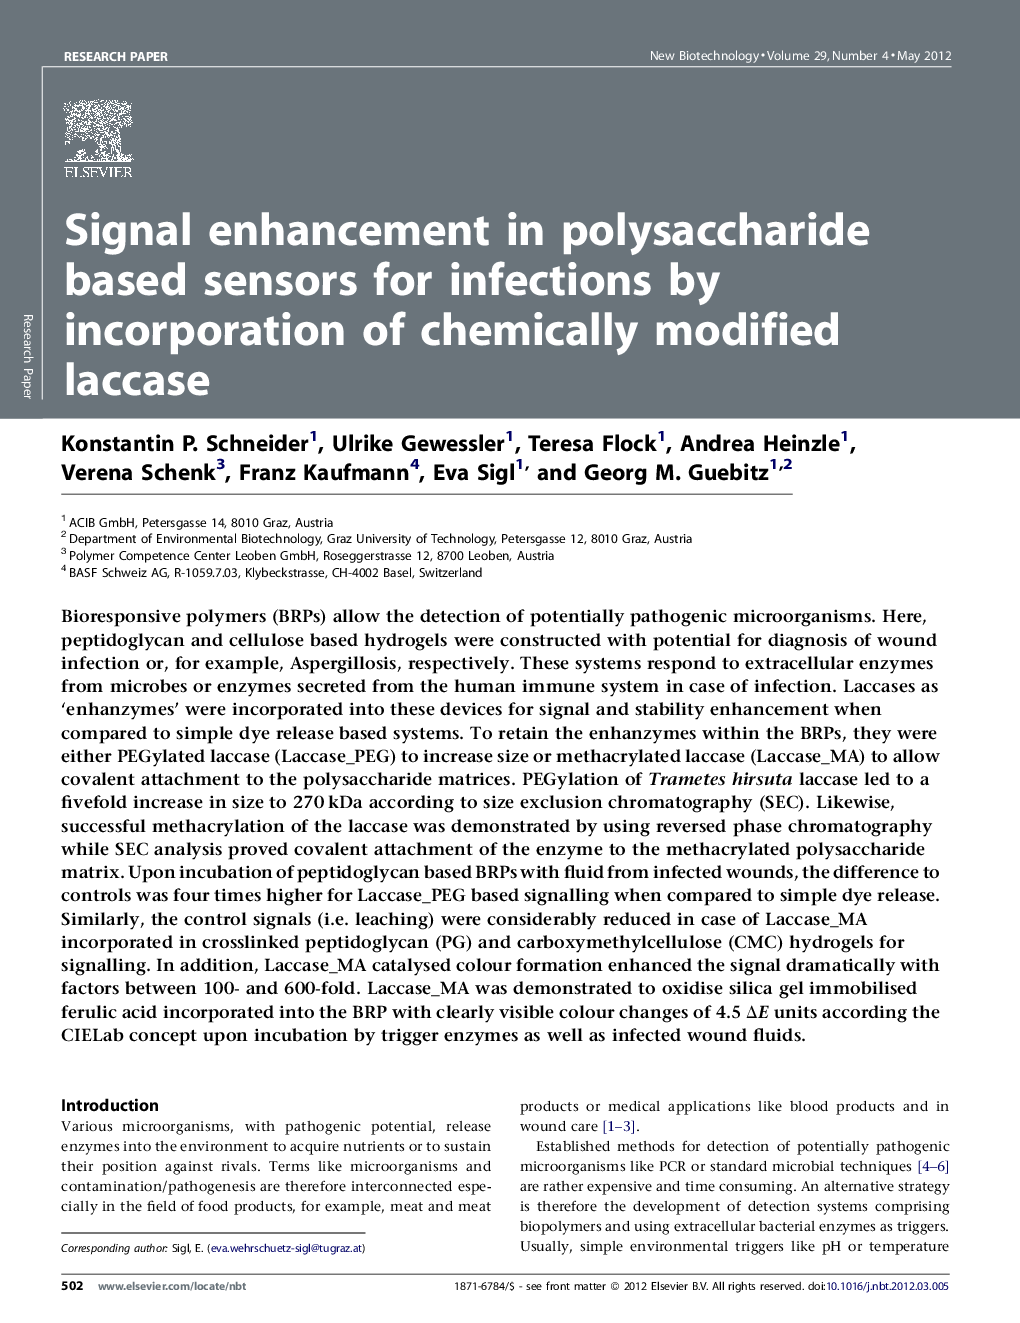 Signal enhancement in polysaccharide based sensors for infections by incorporation of chemically modified laccase